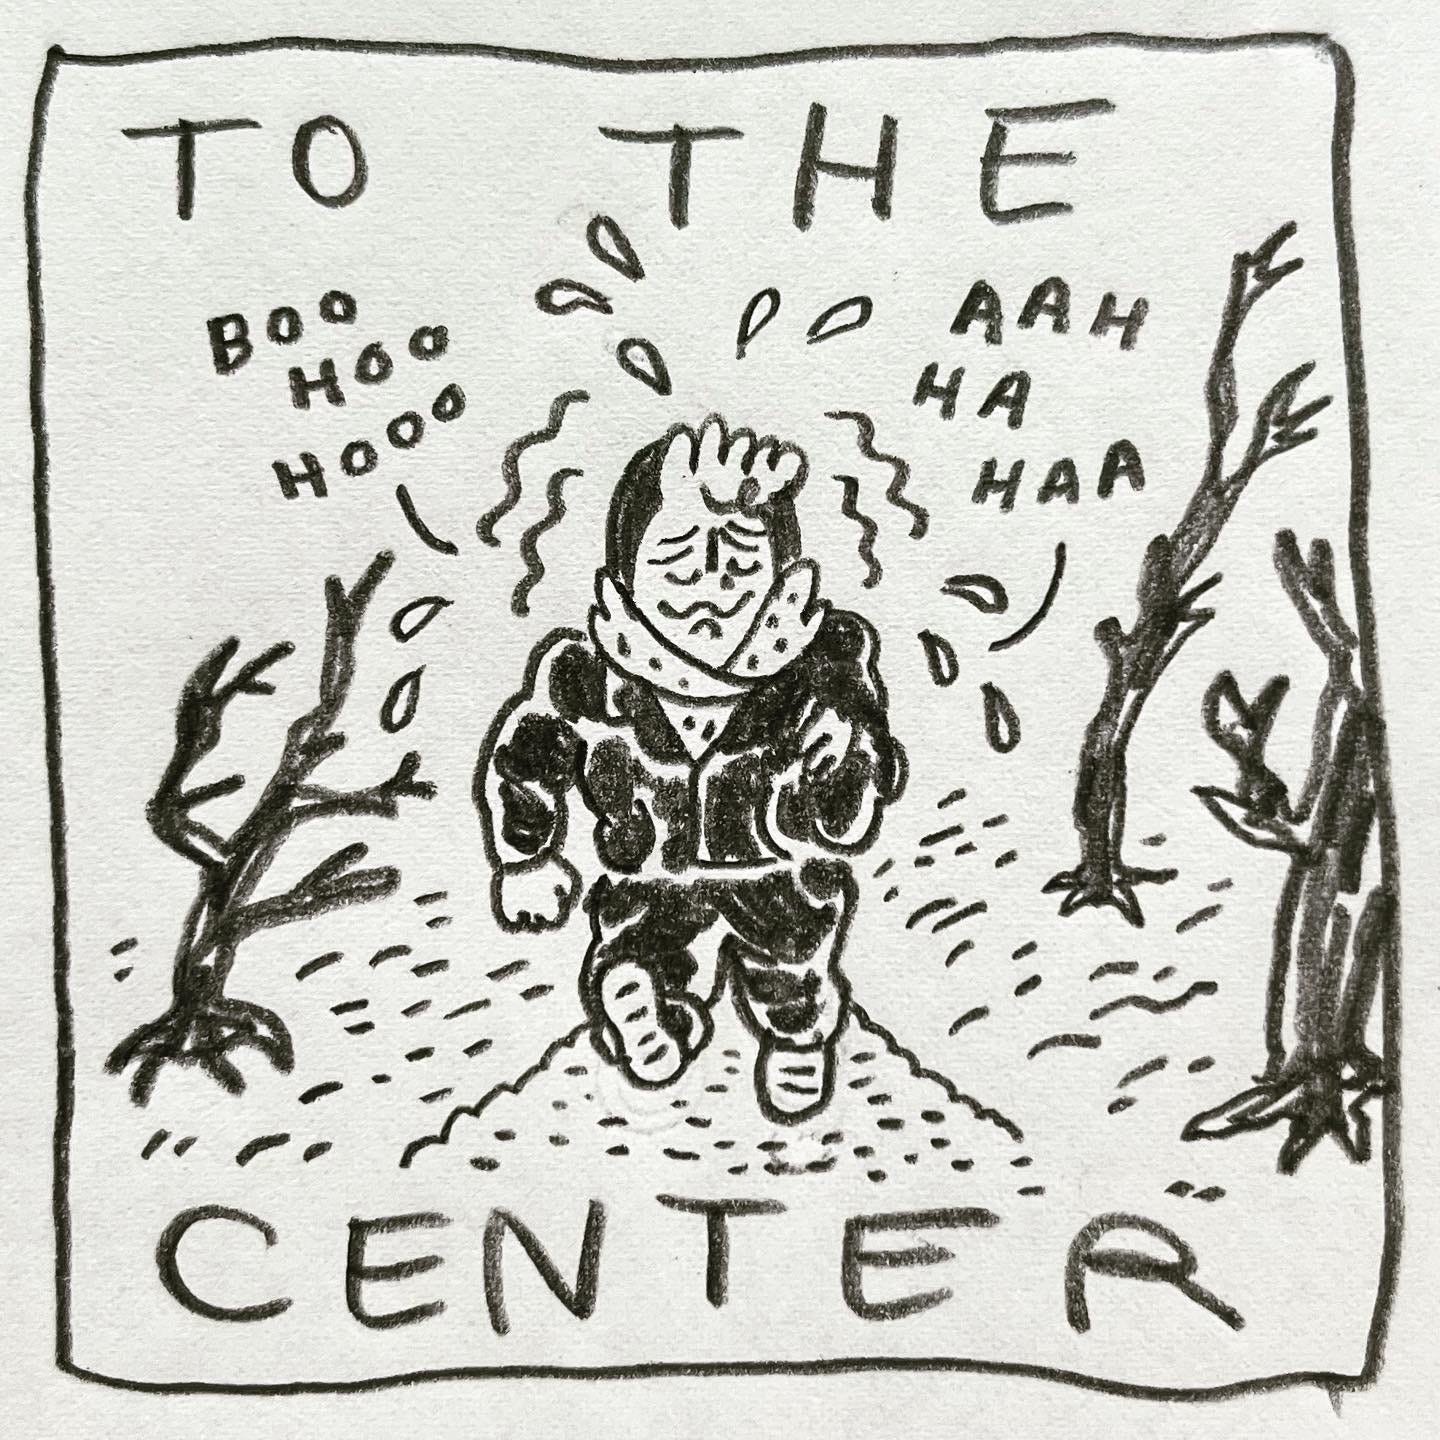 Panel 3: to the center Image: Lark is bundled up in a puffy black jacket, hoodie and scarf. They're walking briskly down a path outside, between bare trees blowing in the wind. Their face is in a half smile, half frown. Their head is emanating waves, with sweat and tears dripping off of them. They're crying and laughing, "boo hoo hoo, ahh ha ha"